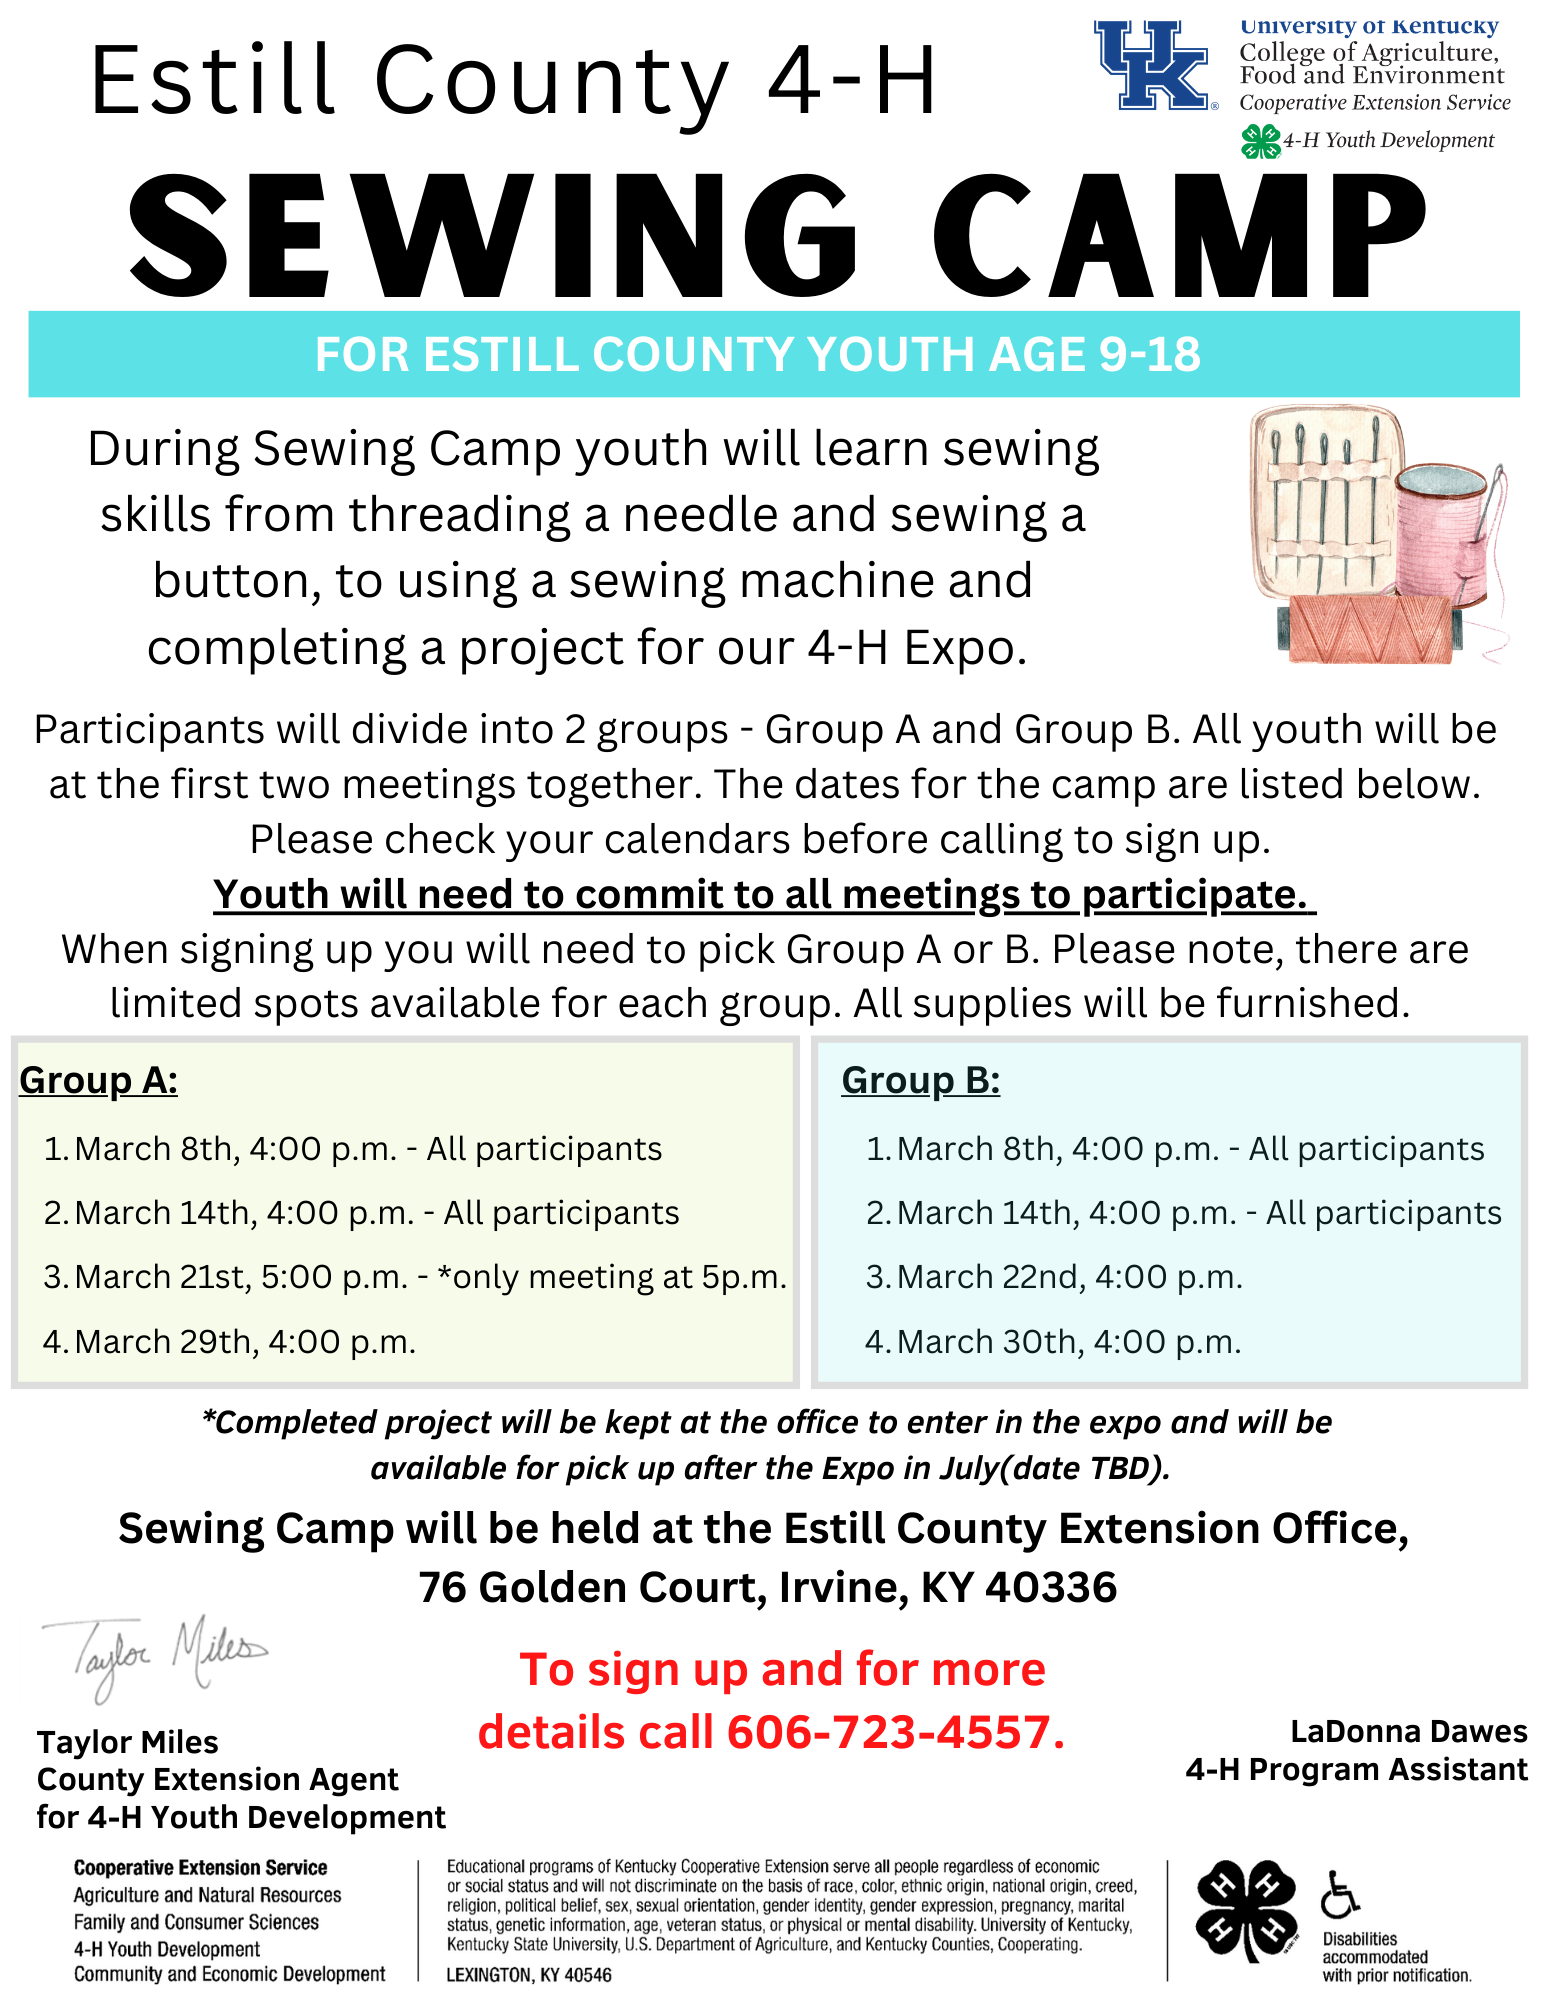 4-H Sewing Camp Informational Flyer